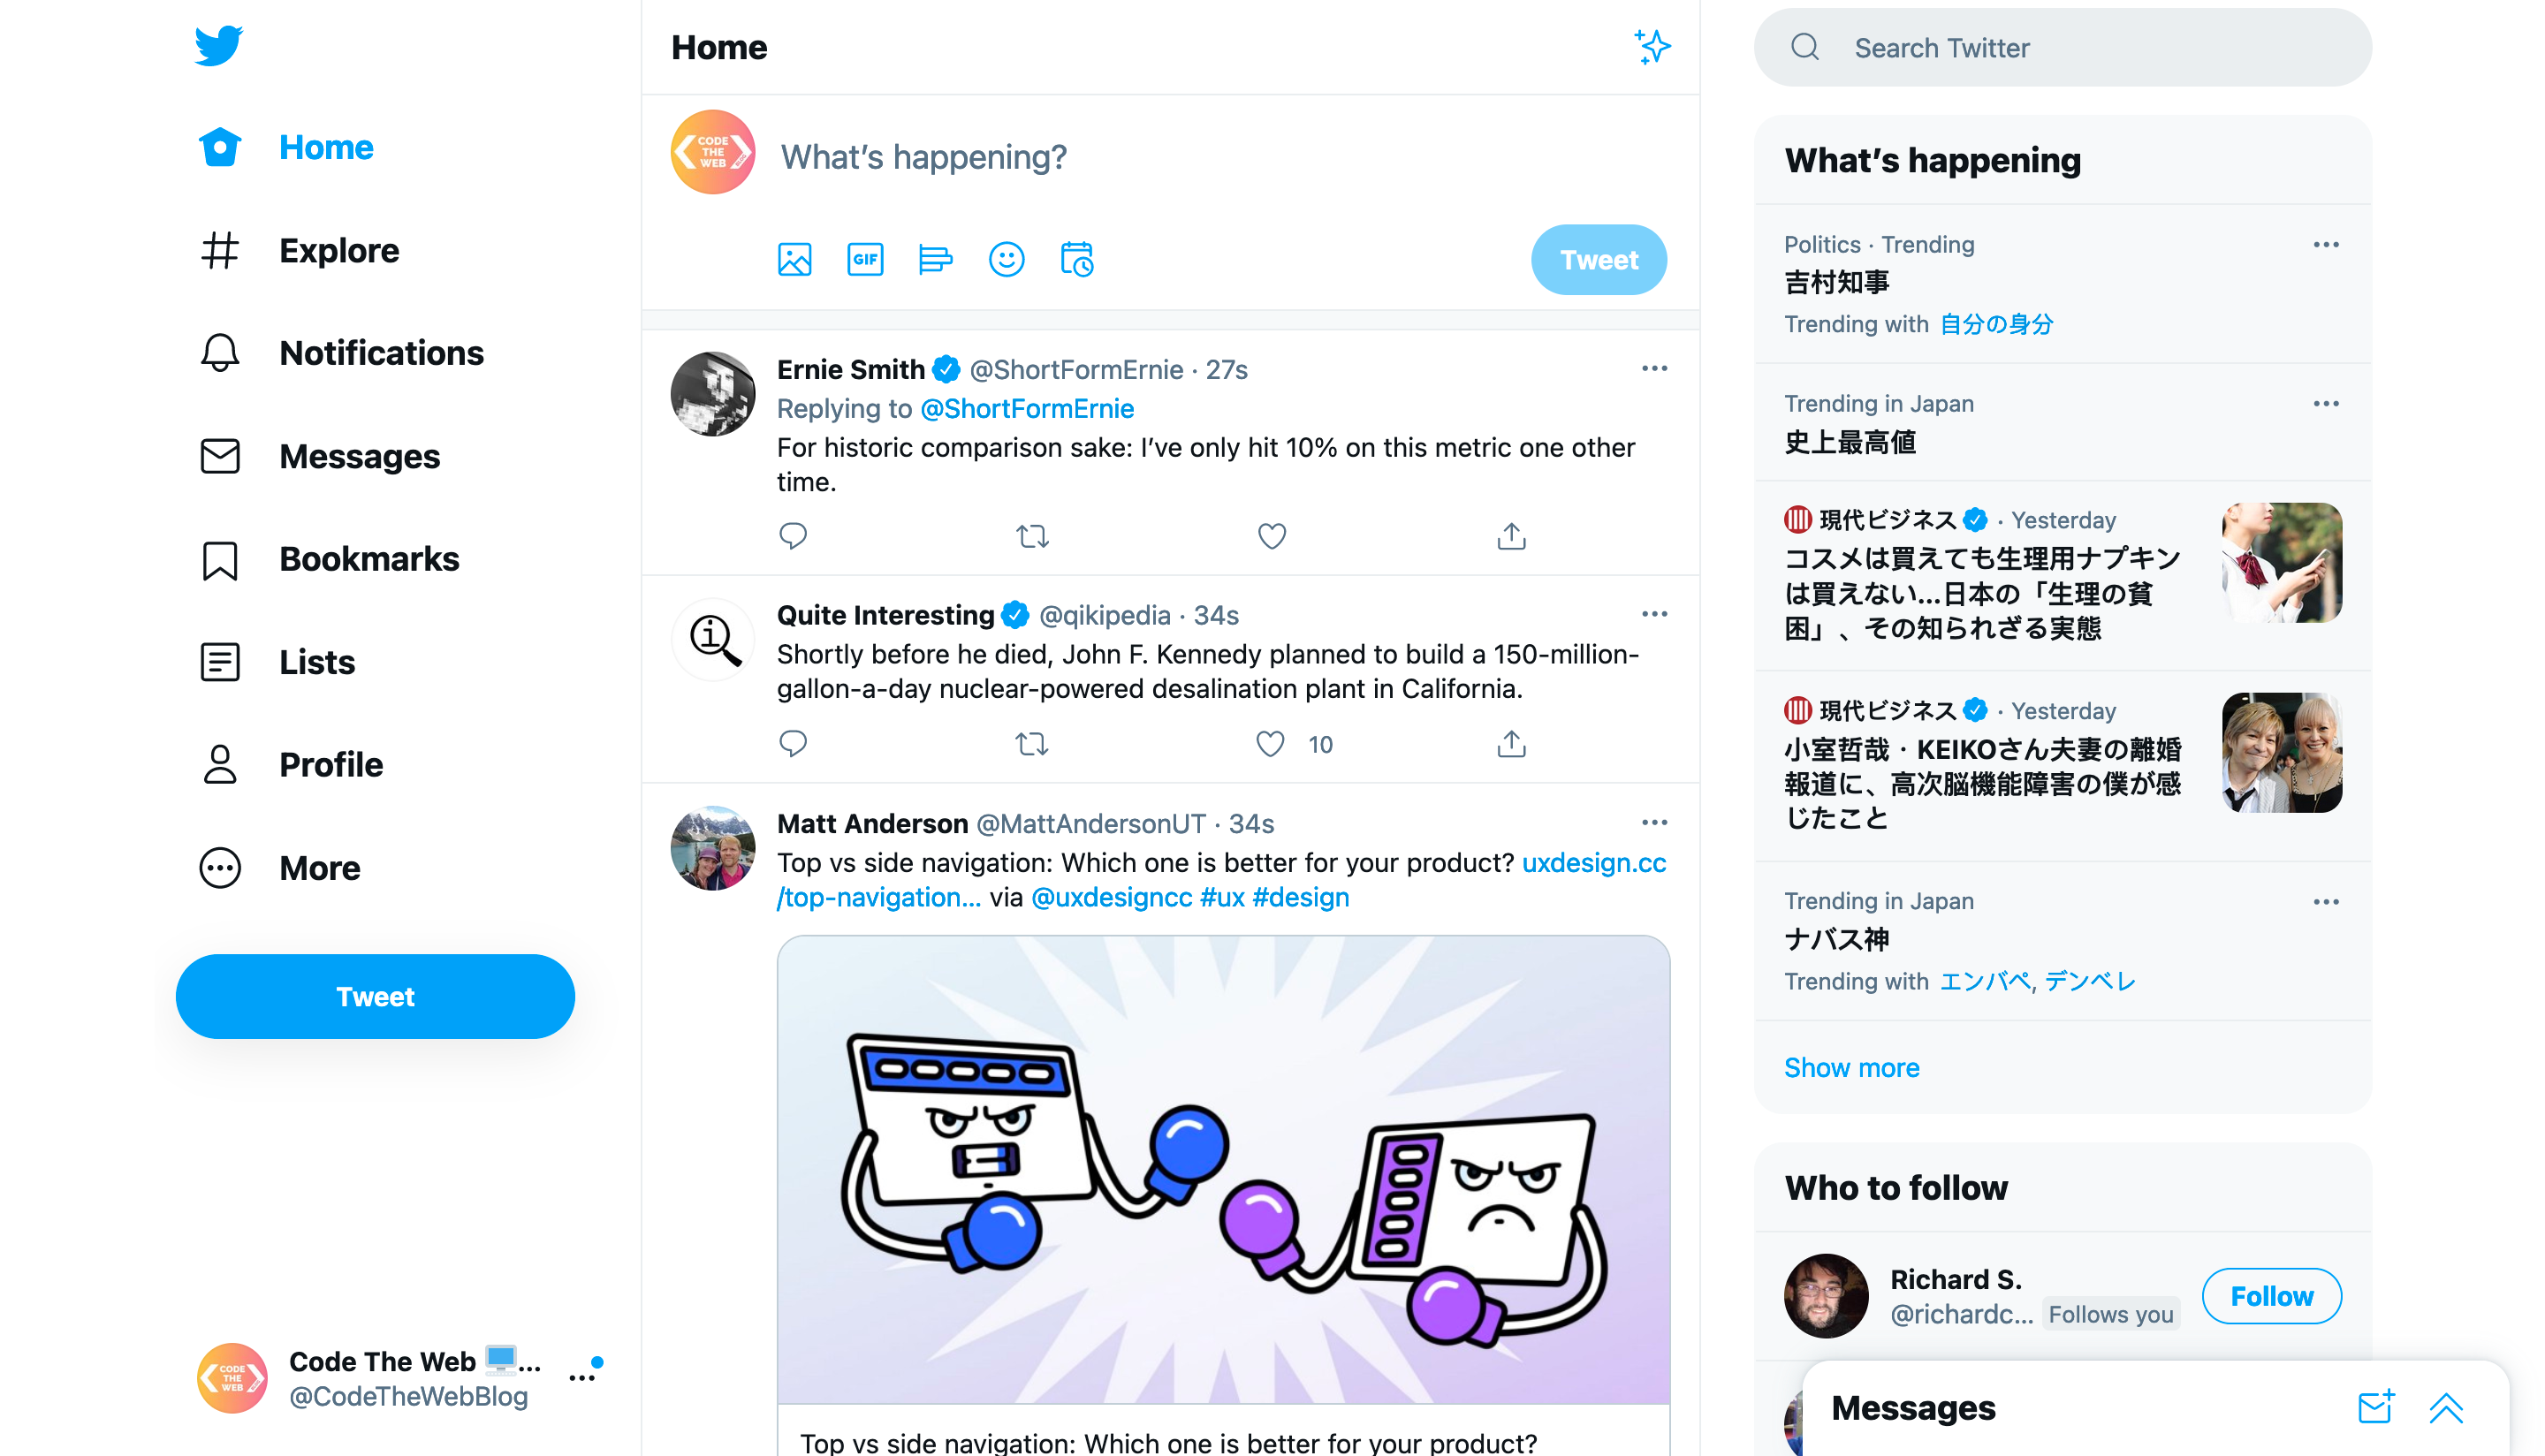 Twitter's home page on desktop